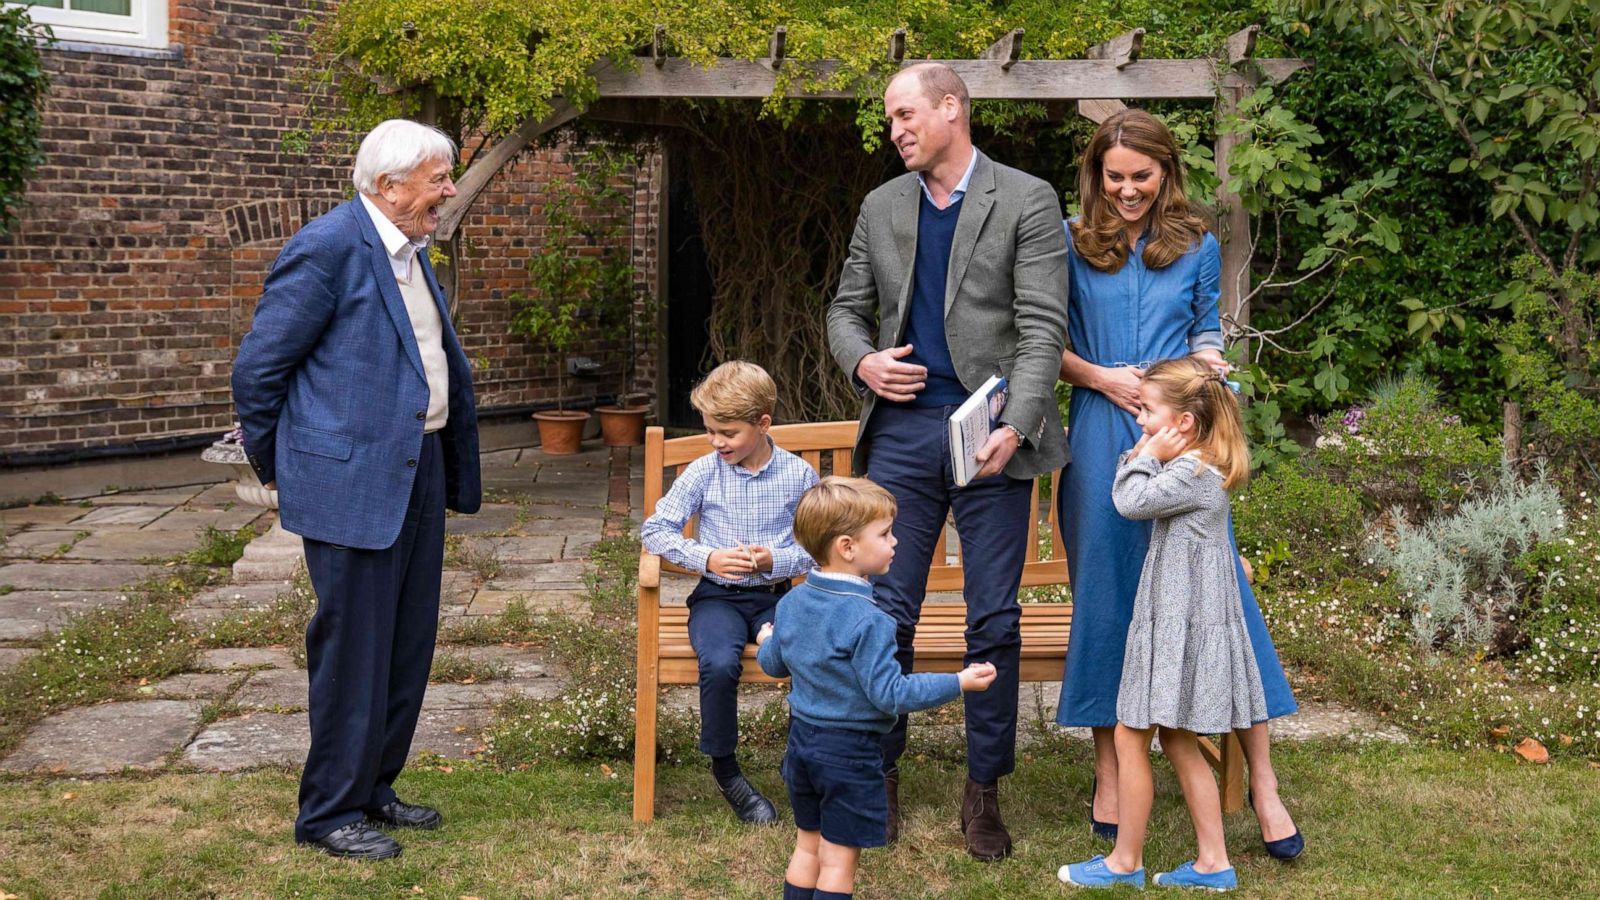 PHOTO: Prince William, Catherine, Duchess of Cambridge, Prince George, Princess Charlotte and Prince Louis with Sir David Attenborough in the gardens of Kensington Palace in London.